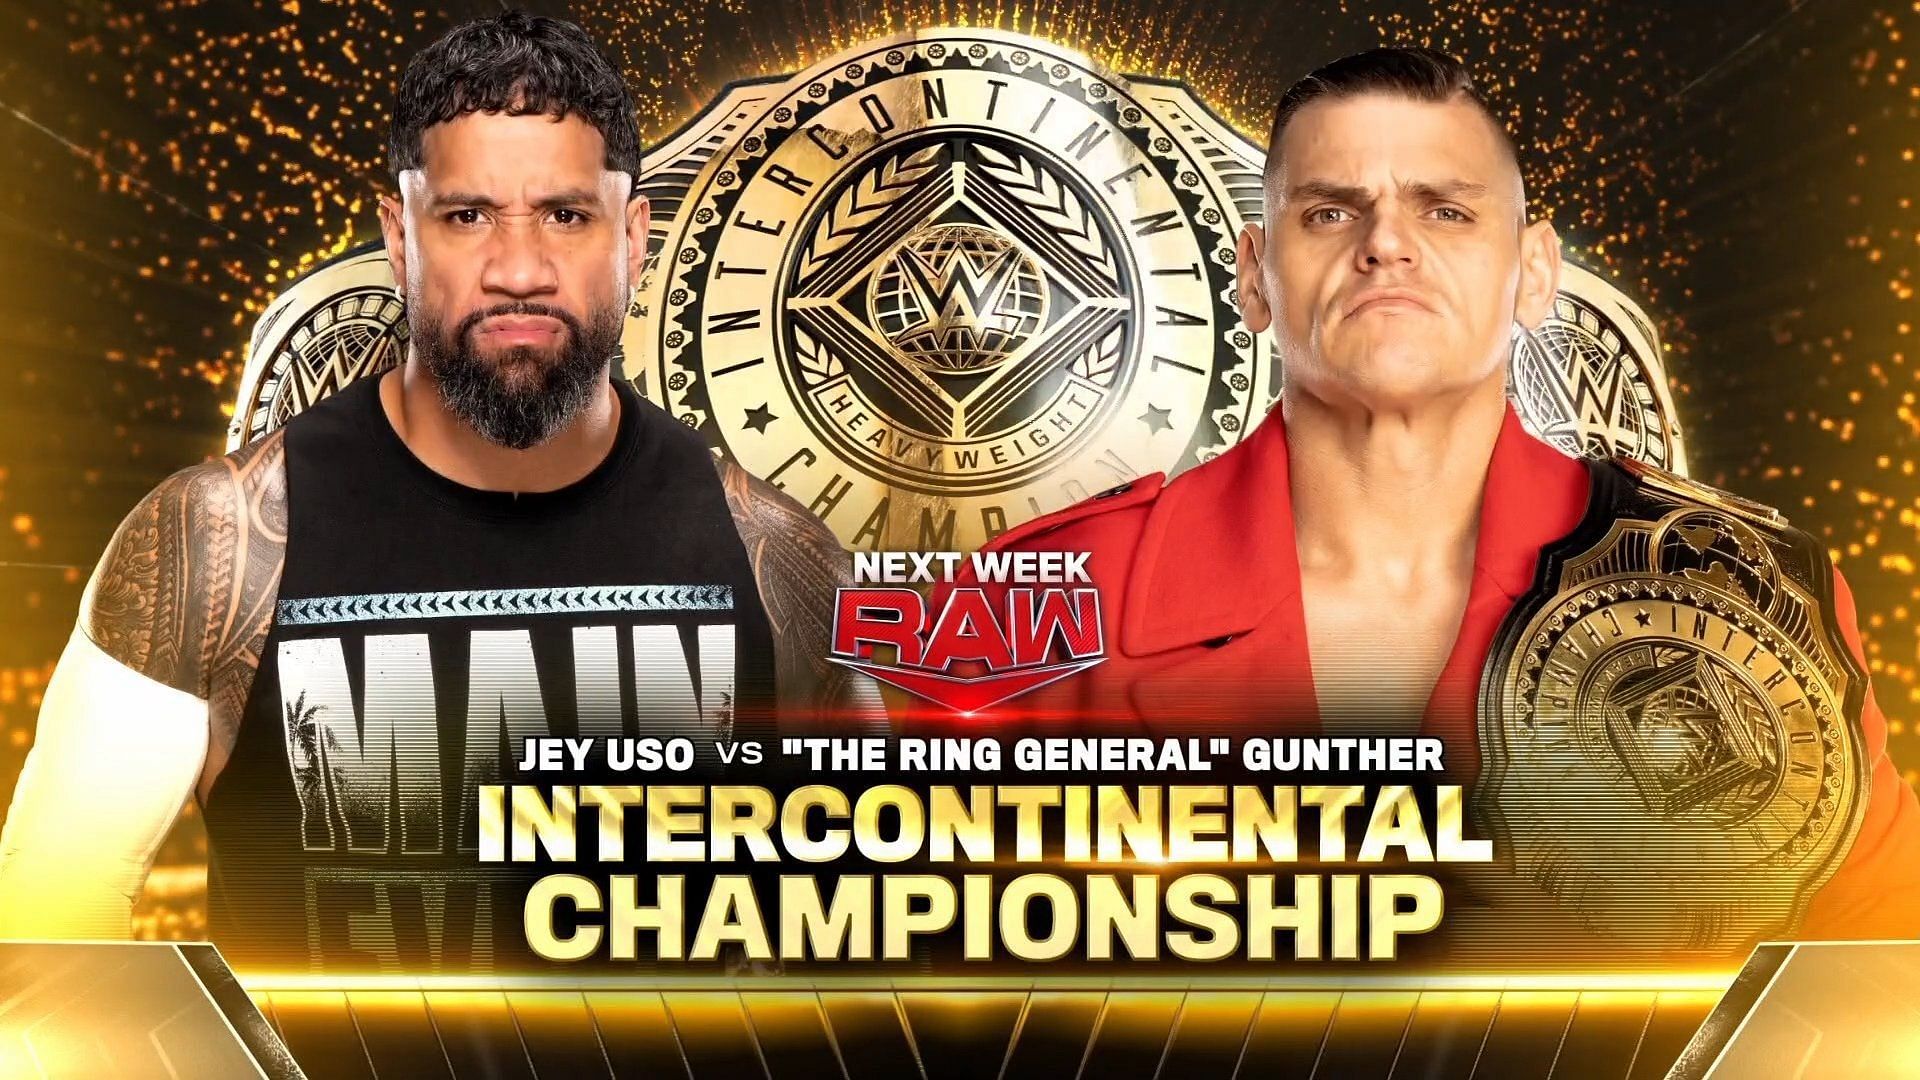 Jey Uso will challenge Gunther for the Intercontinental title next week on RAW.